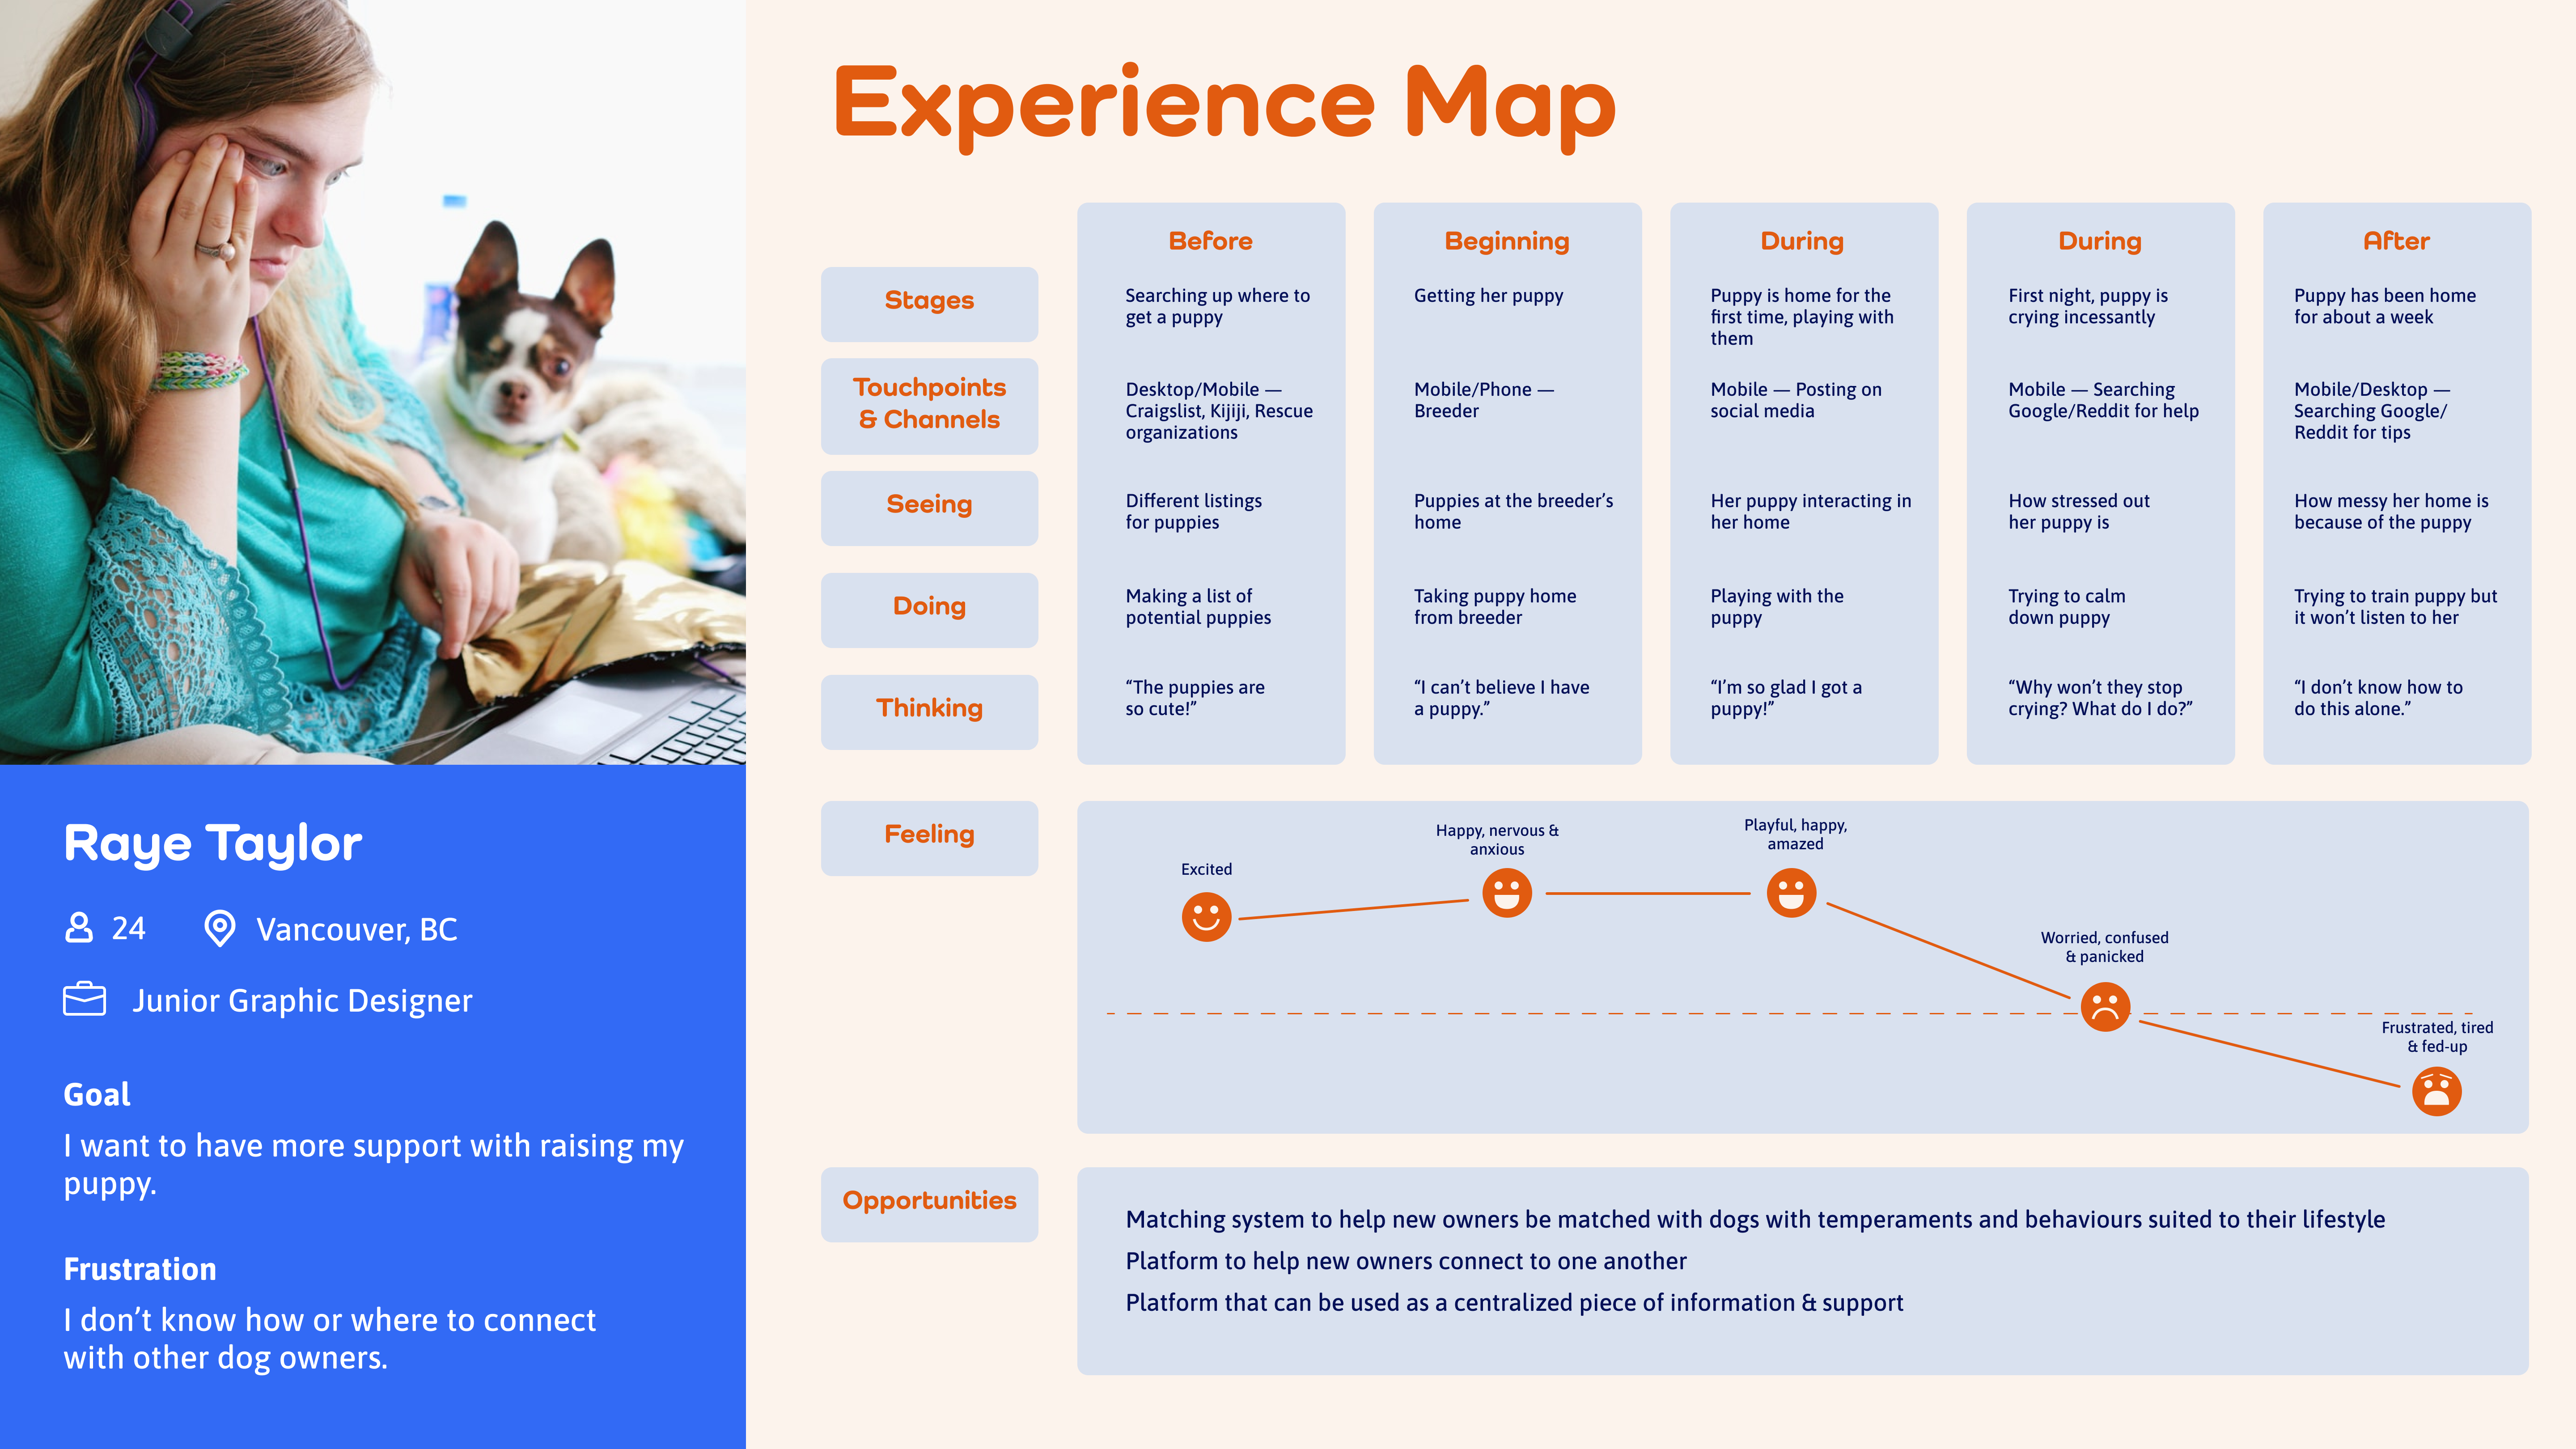 bowwow-image_experience-map-03